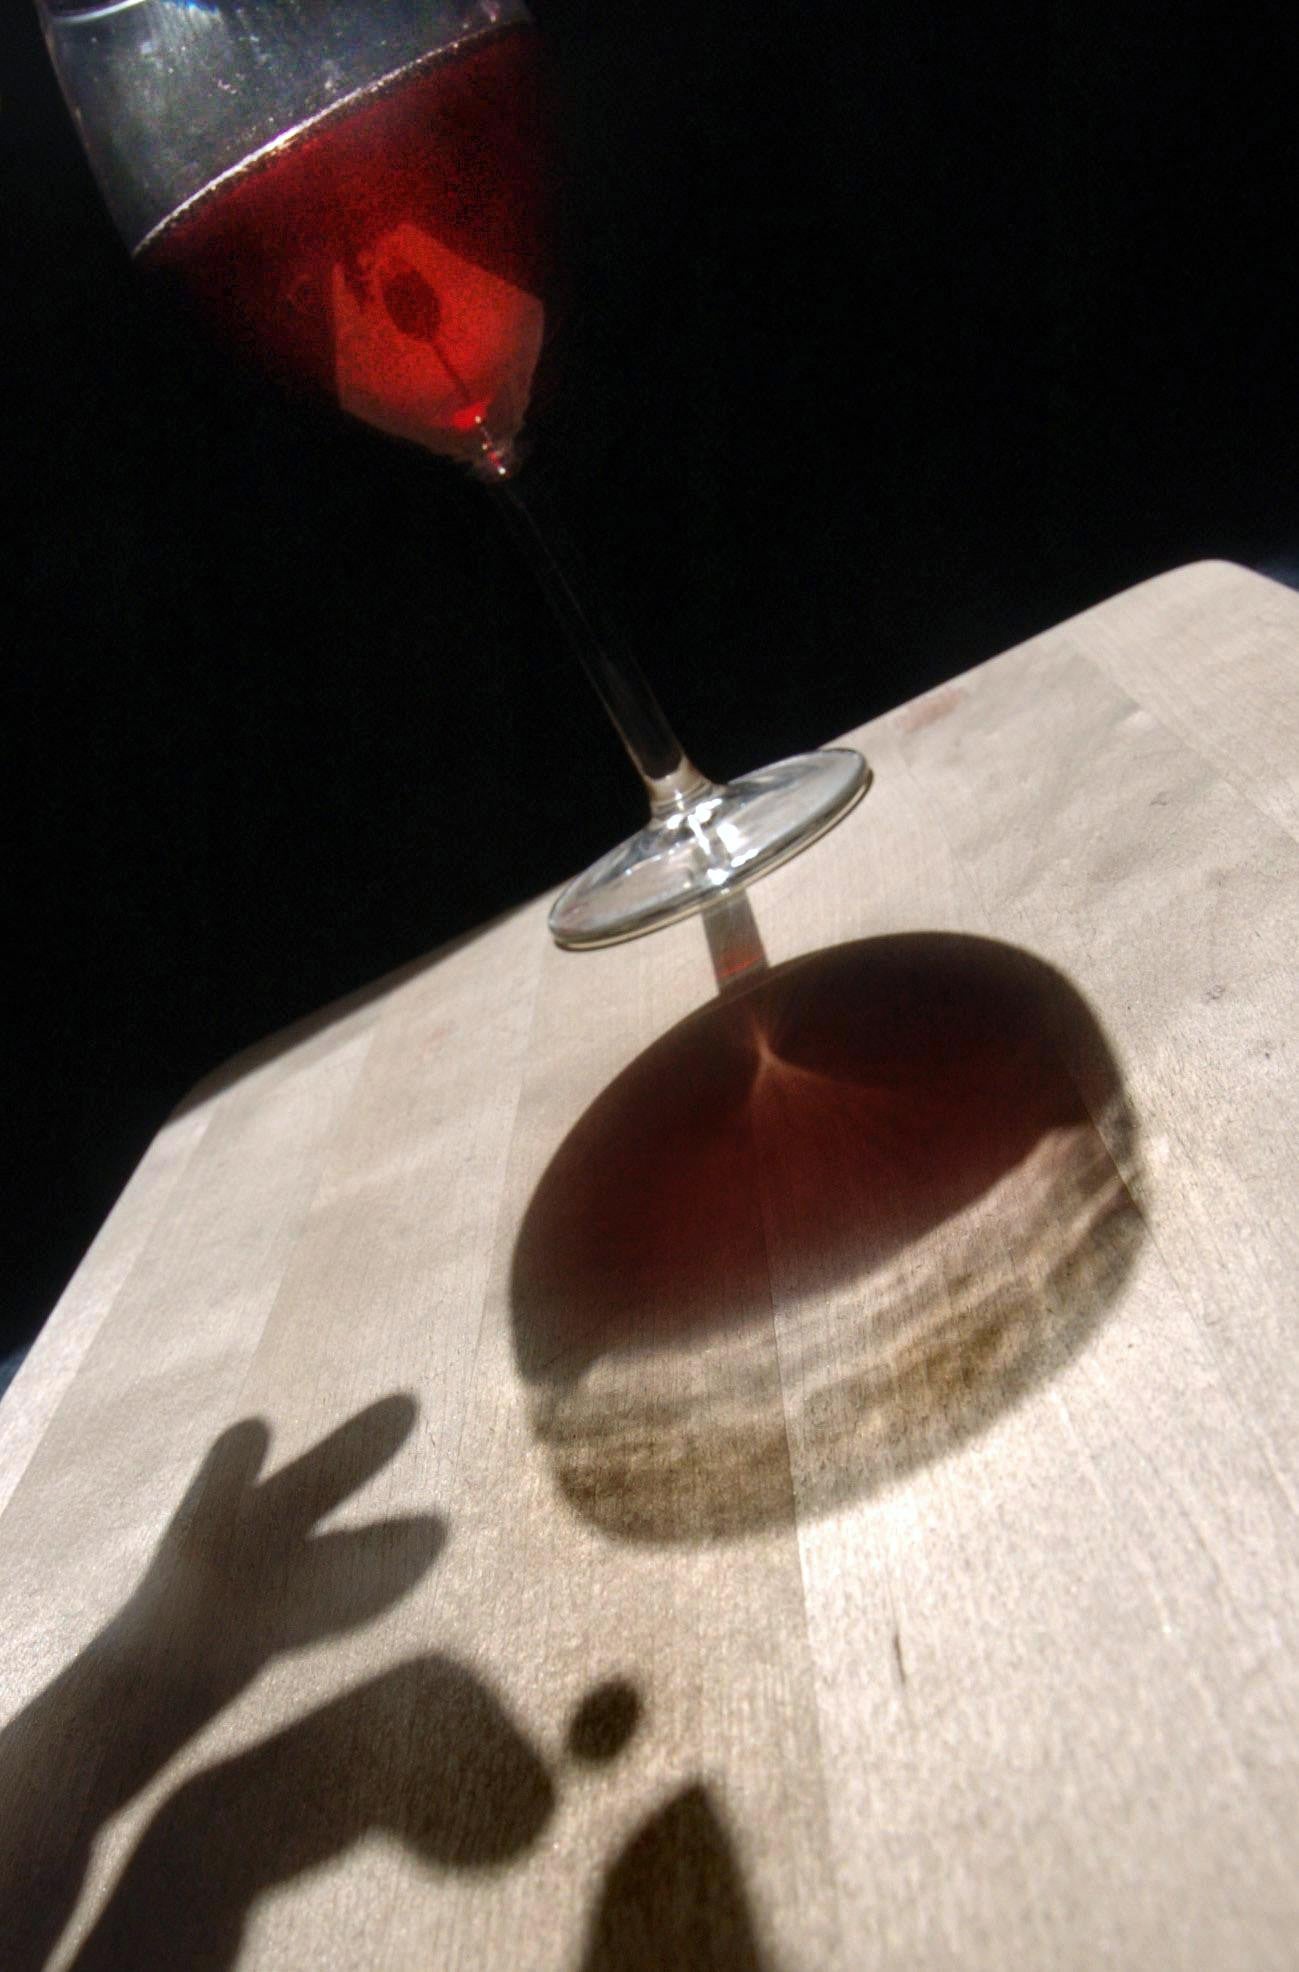 Posed photograph of an alcoholic drink (glass of wine) being spiked. (Danny Lawson/PA)